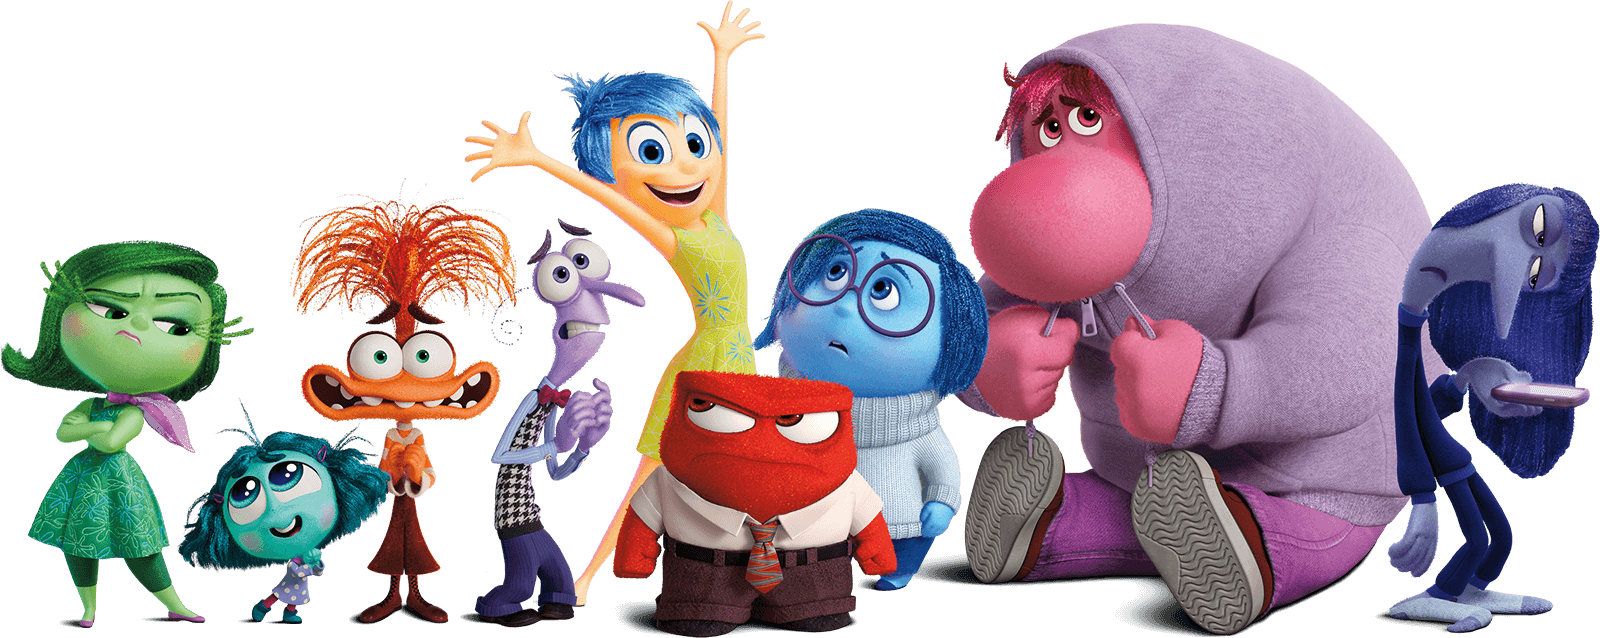 Inside out 2 logo and all emotions